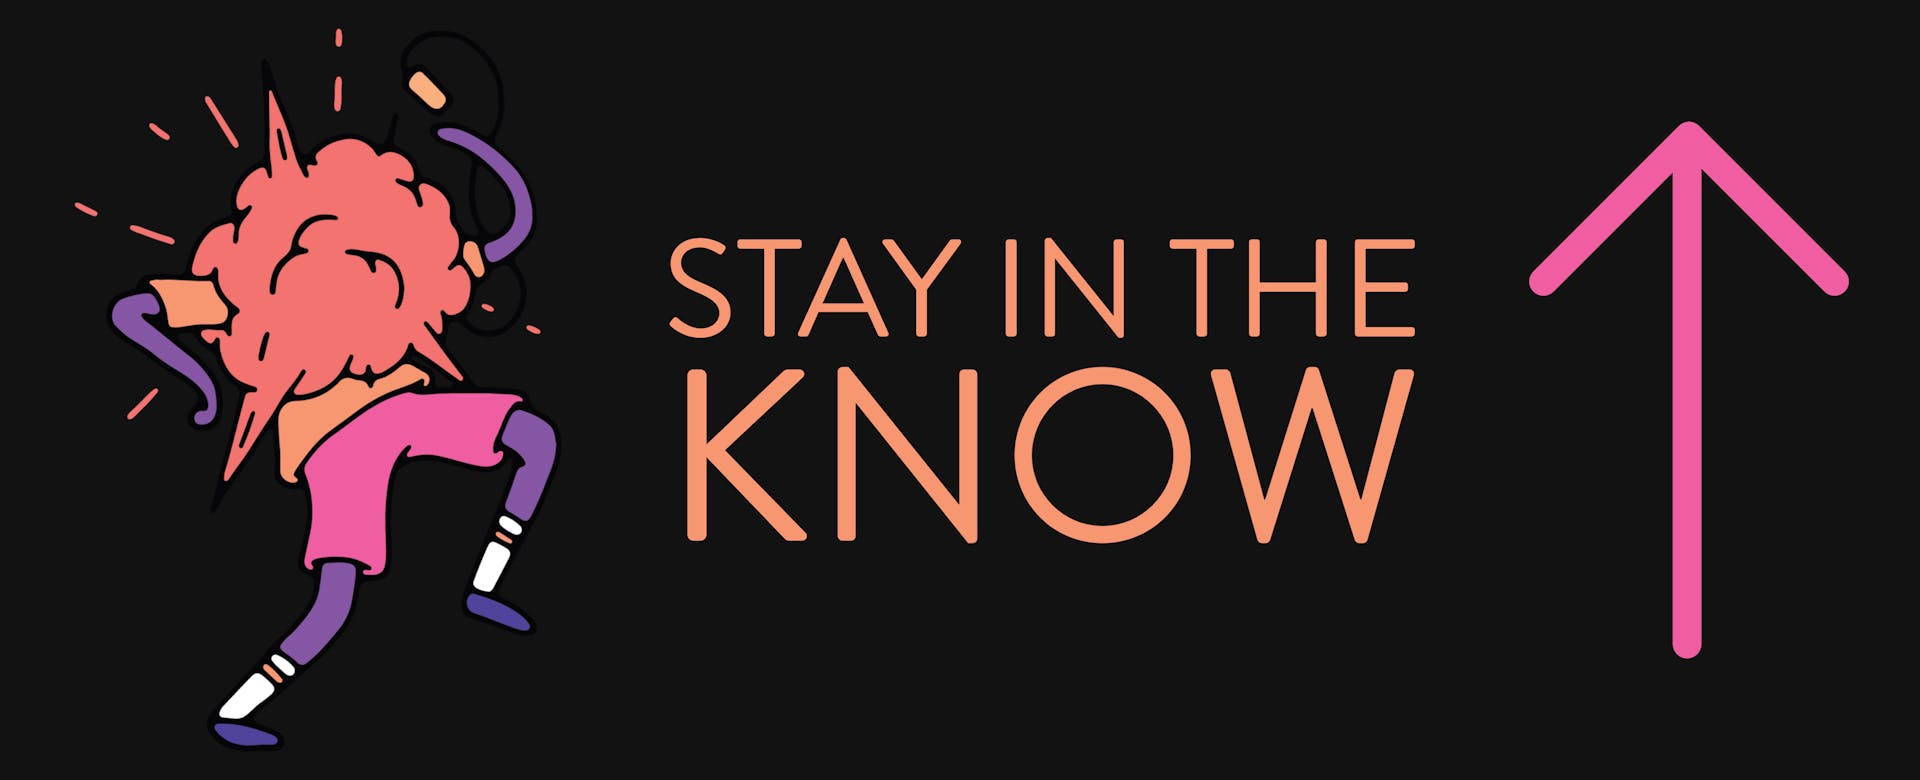 Stay in the know newsletter signup-1 (1)